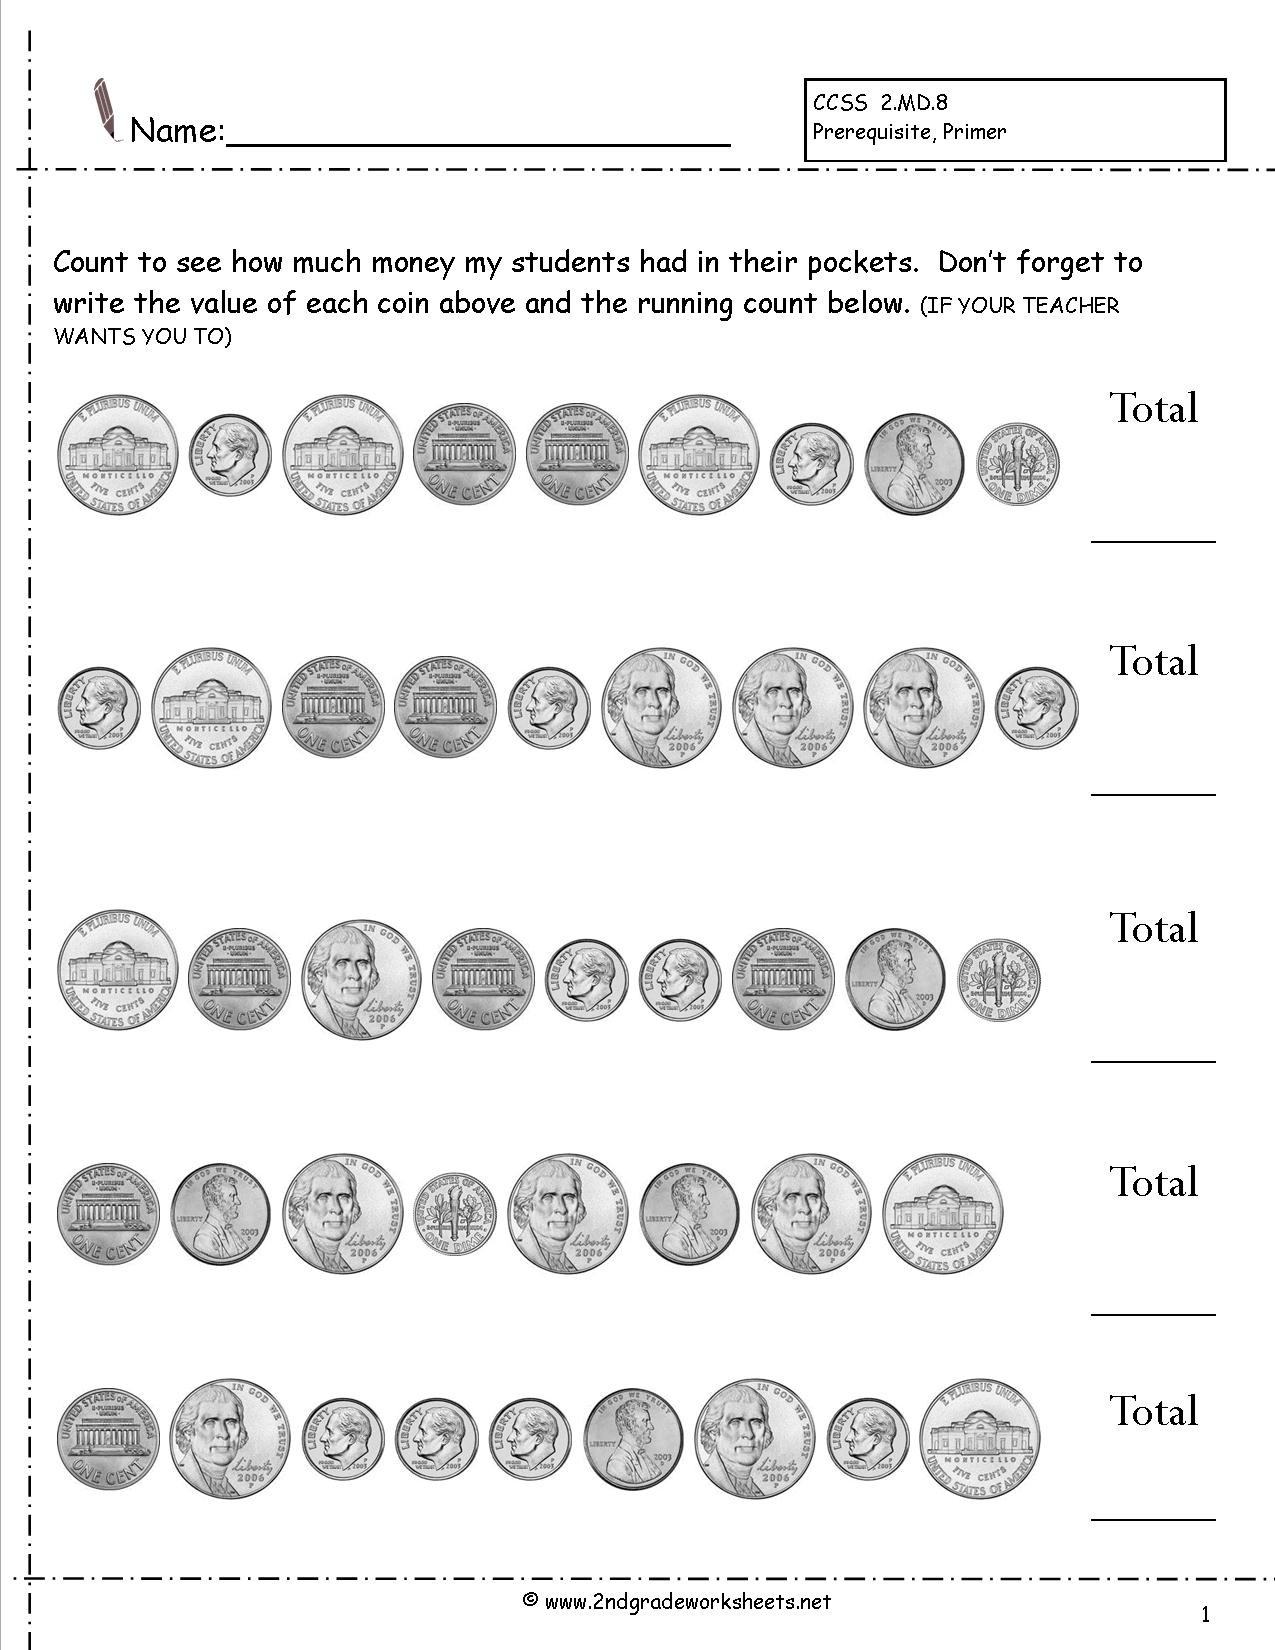 Counting Coins Worksheets 2nd Grade Counting Coins and Money Worksheets and Printouts